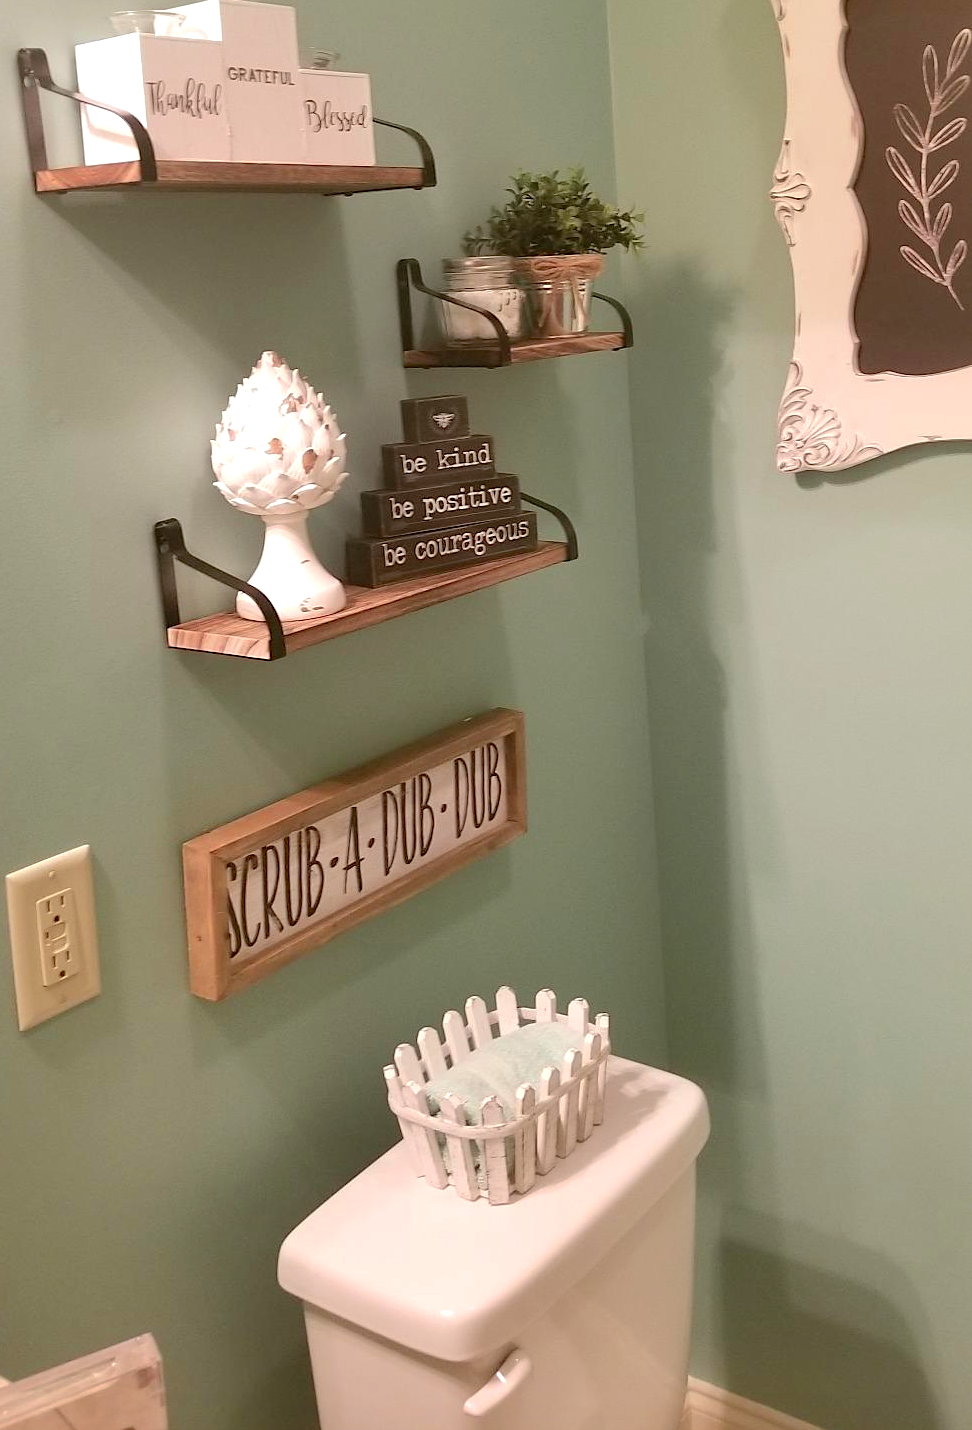 open shelving displayed in bathroom with decorative signs